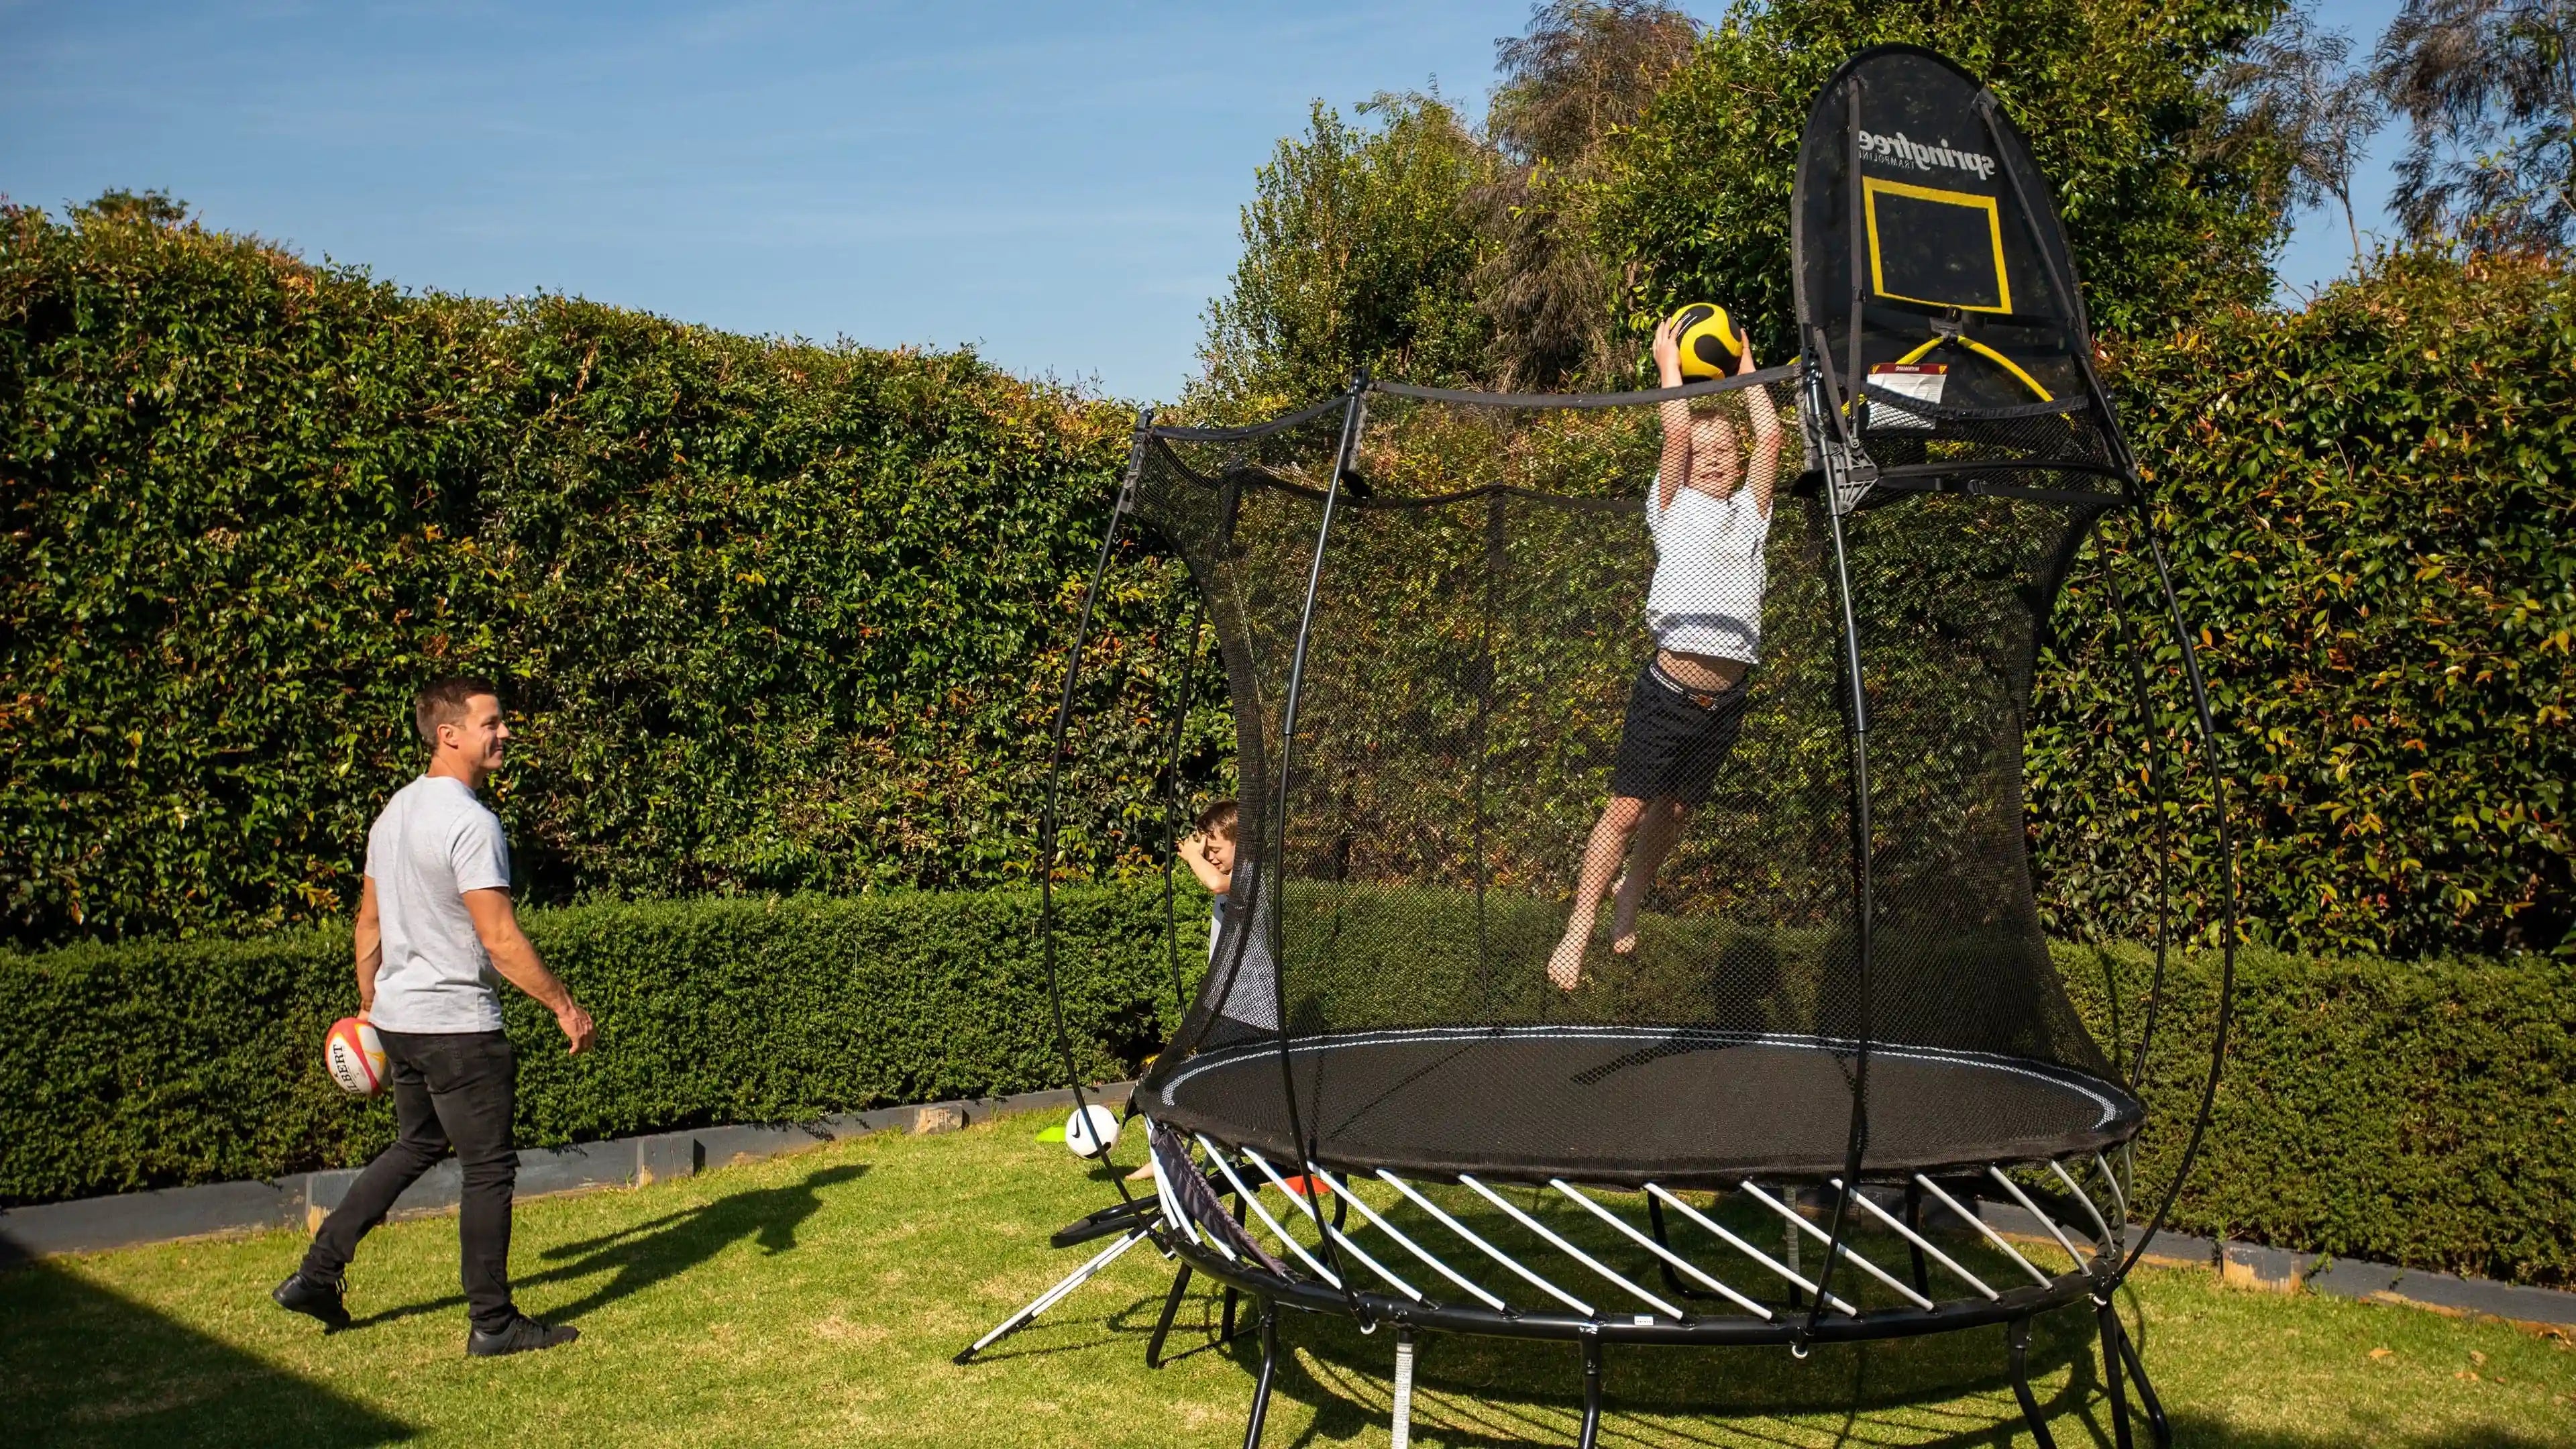 Boy dunking on hoop attached to Trampoline